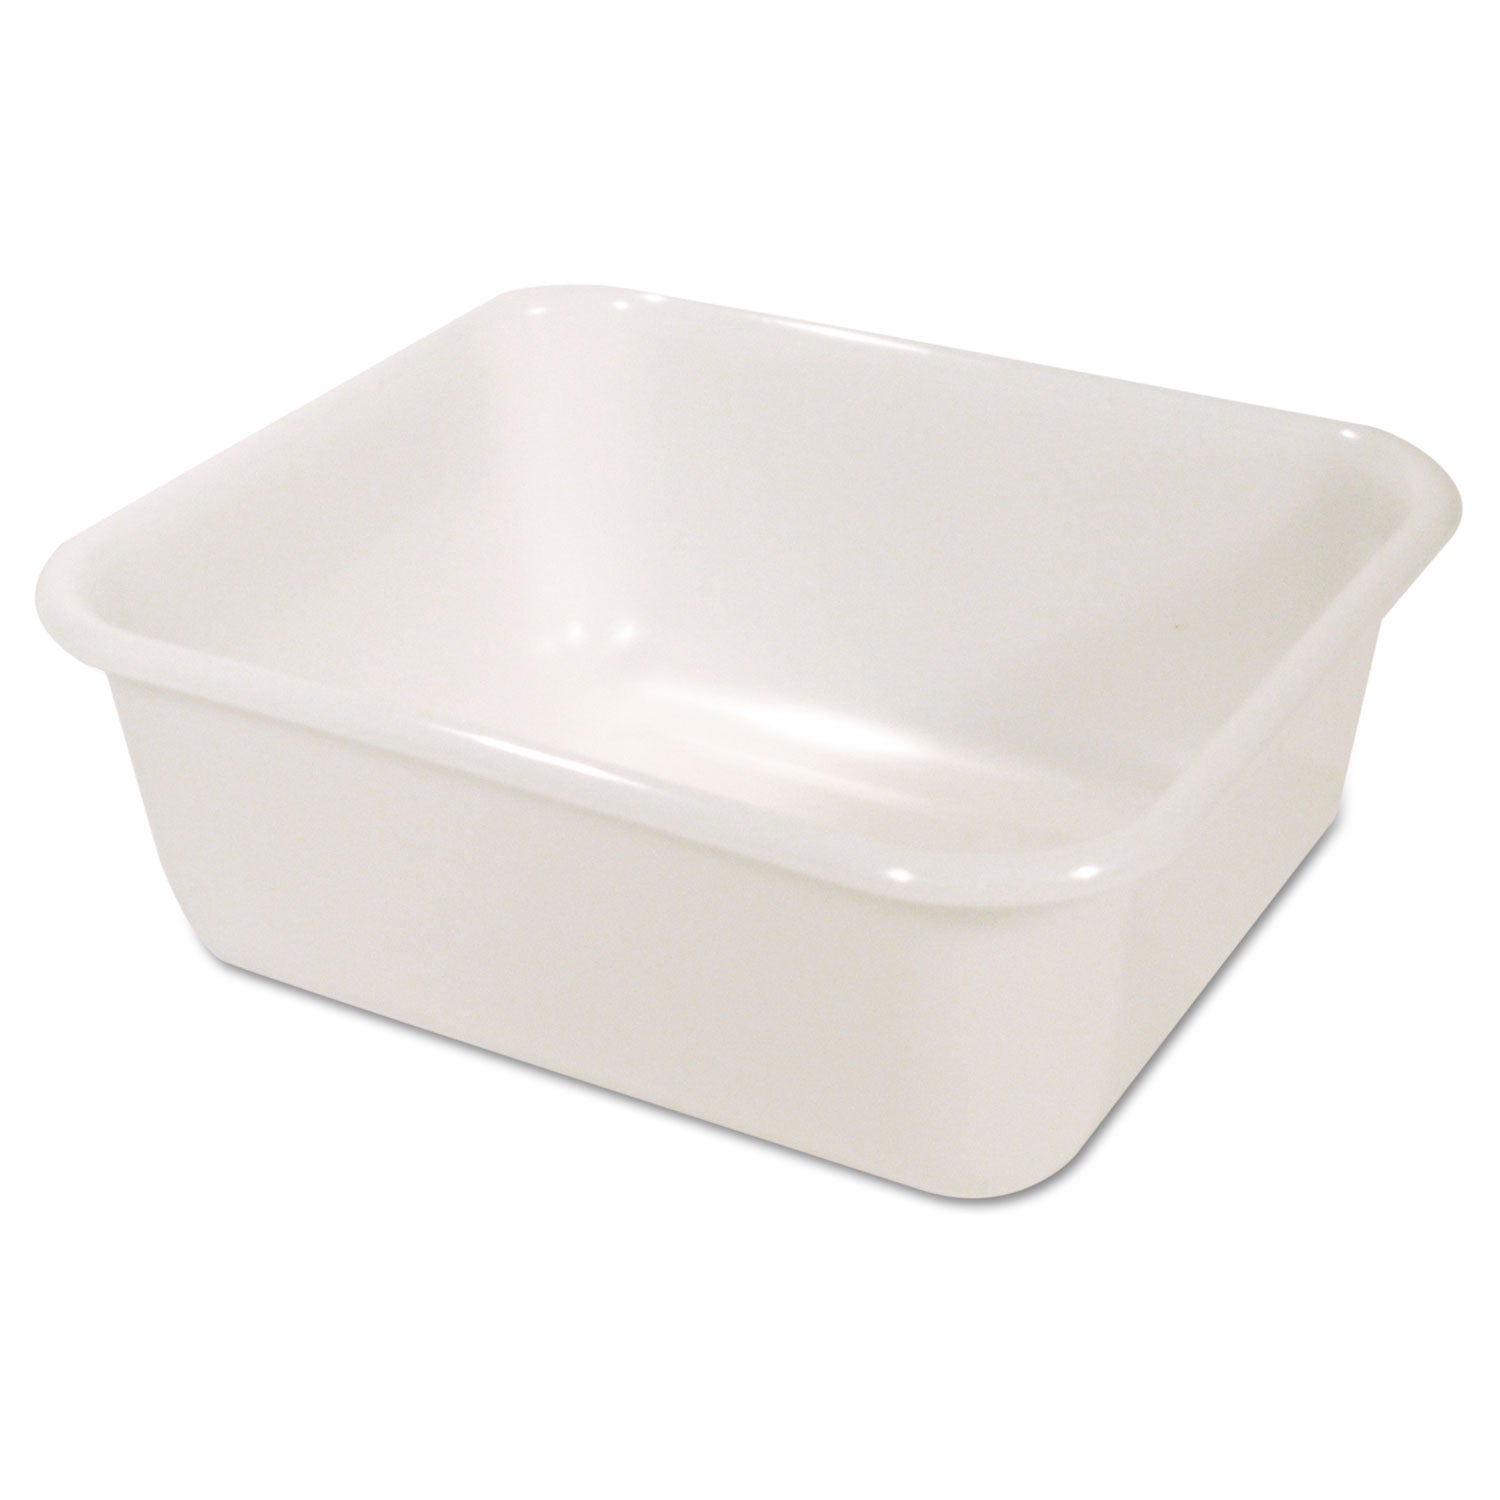 food-tote-boxes-11qt-12-3-8w-x-5-3-8d-x-14-3-8h-white-6-carton_rcp3690whict - 1